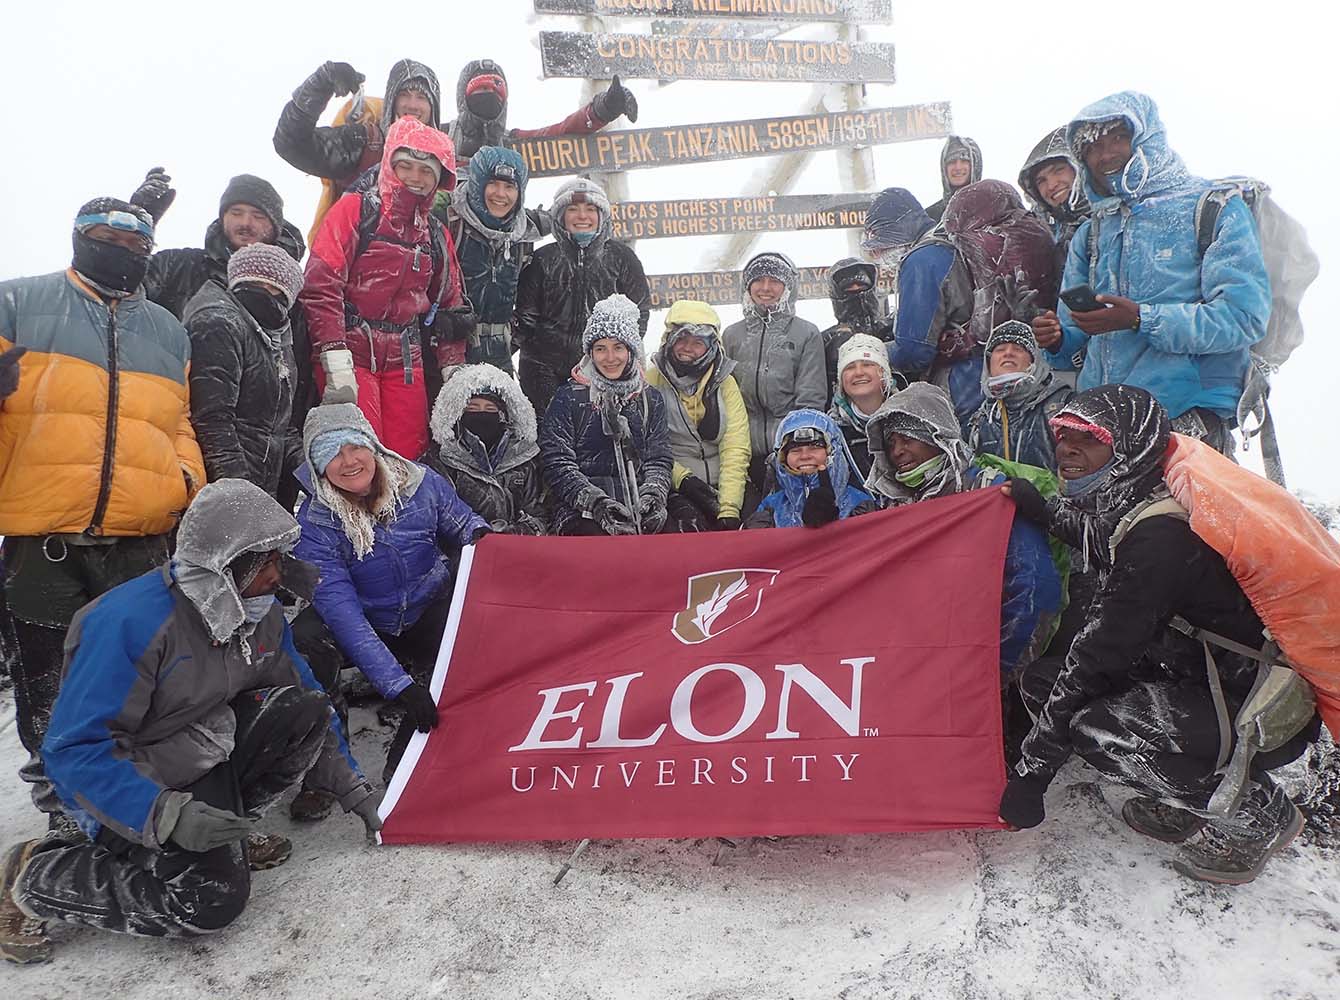 Students participate in one of Elon University's best study abroad programs in Tanzania. They stand at the top of Mount Kilimanjaro holding an Elon University banner, bundled up and surrounded by snow.